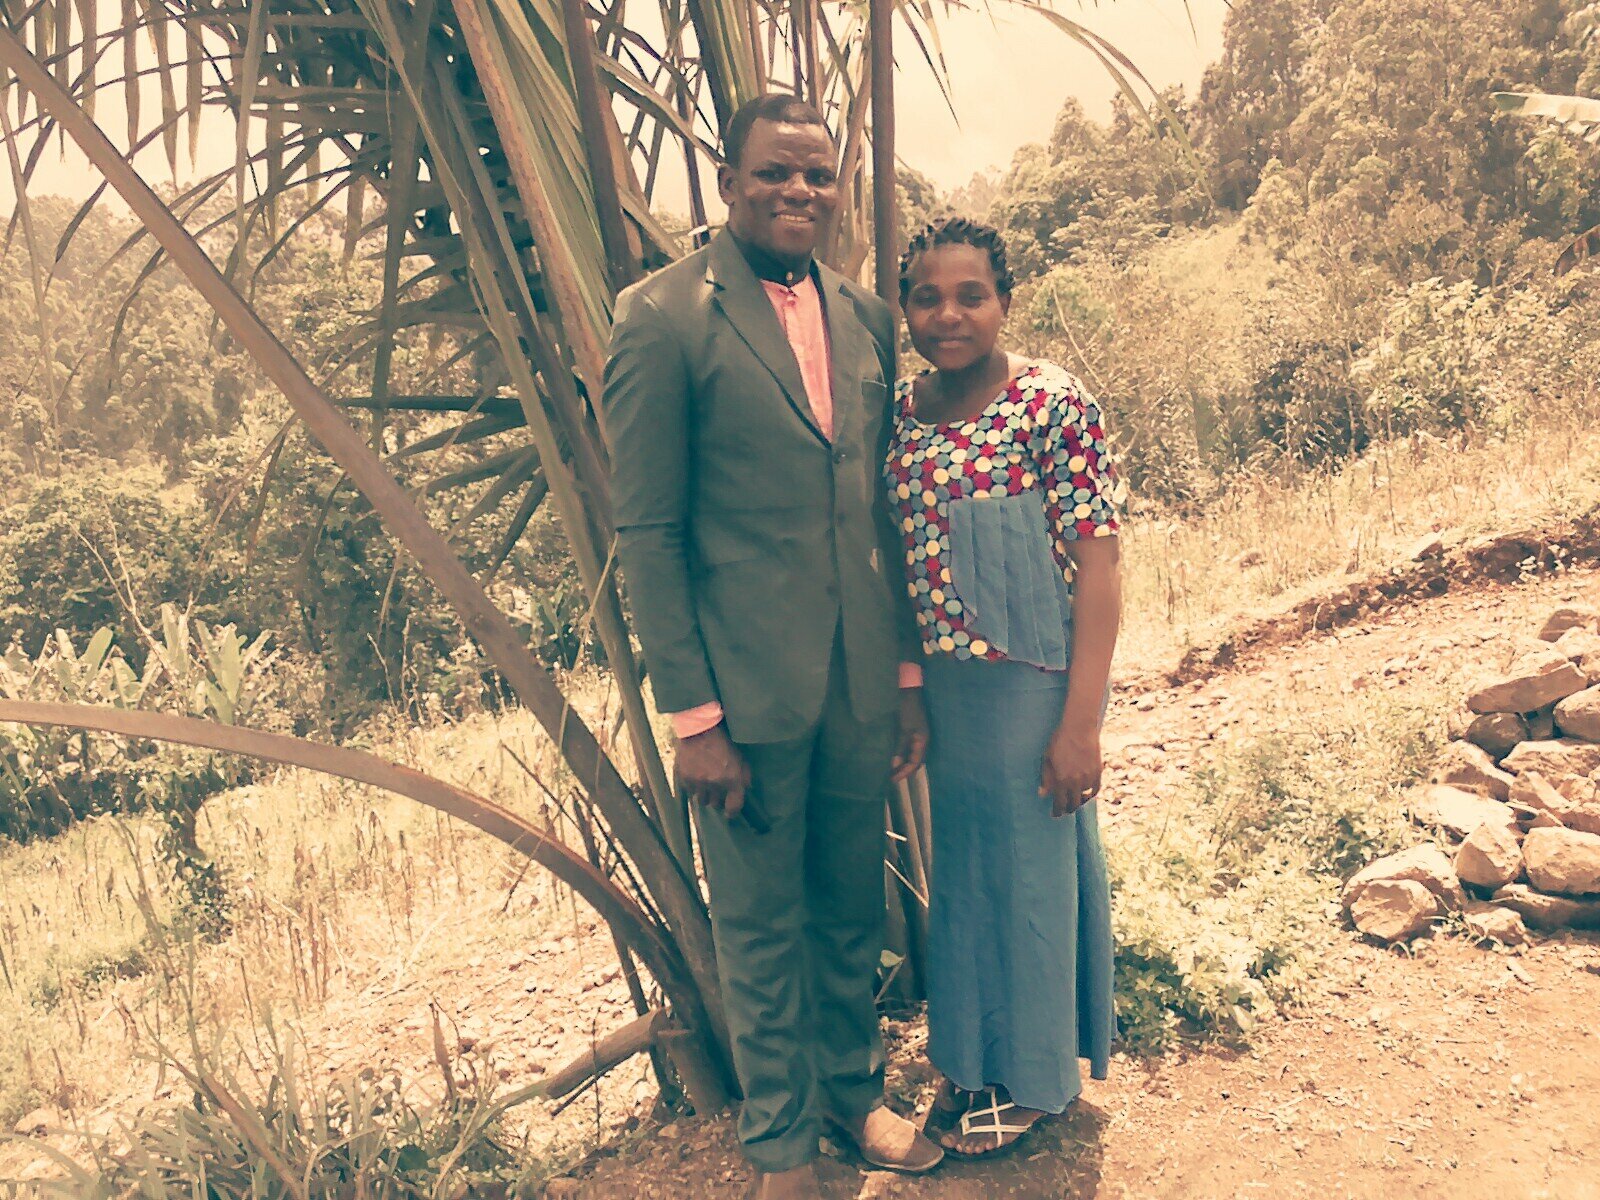  Ezekiel and Odette begin a courageous and effective ministry in violence-torn Cameroon. 